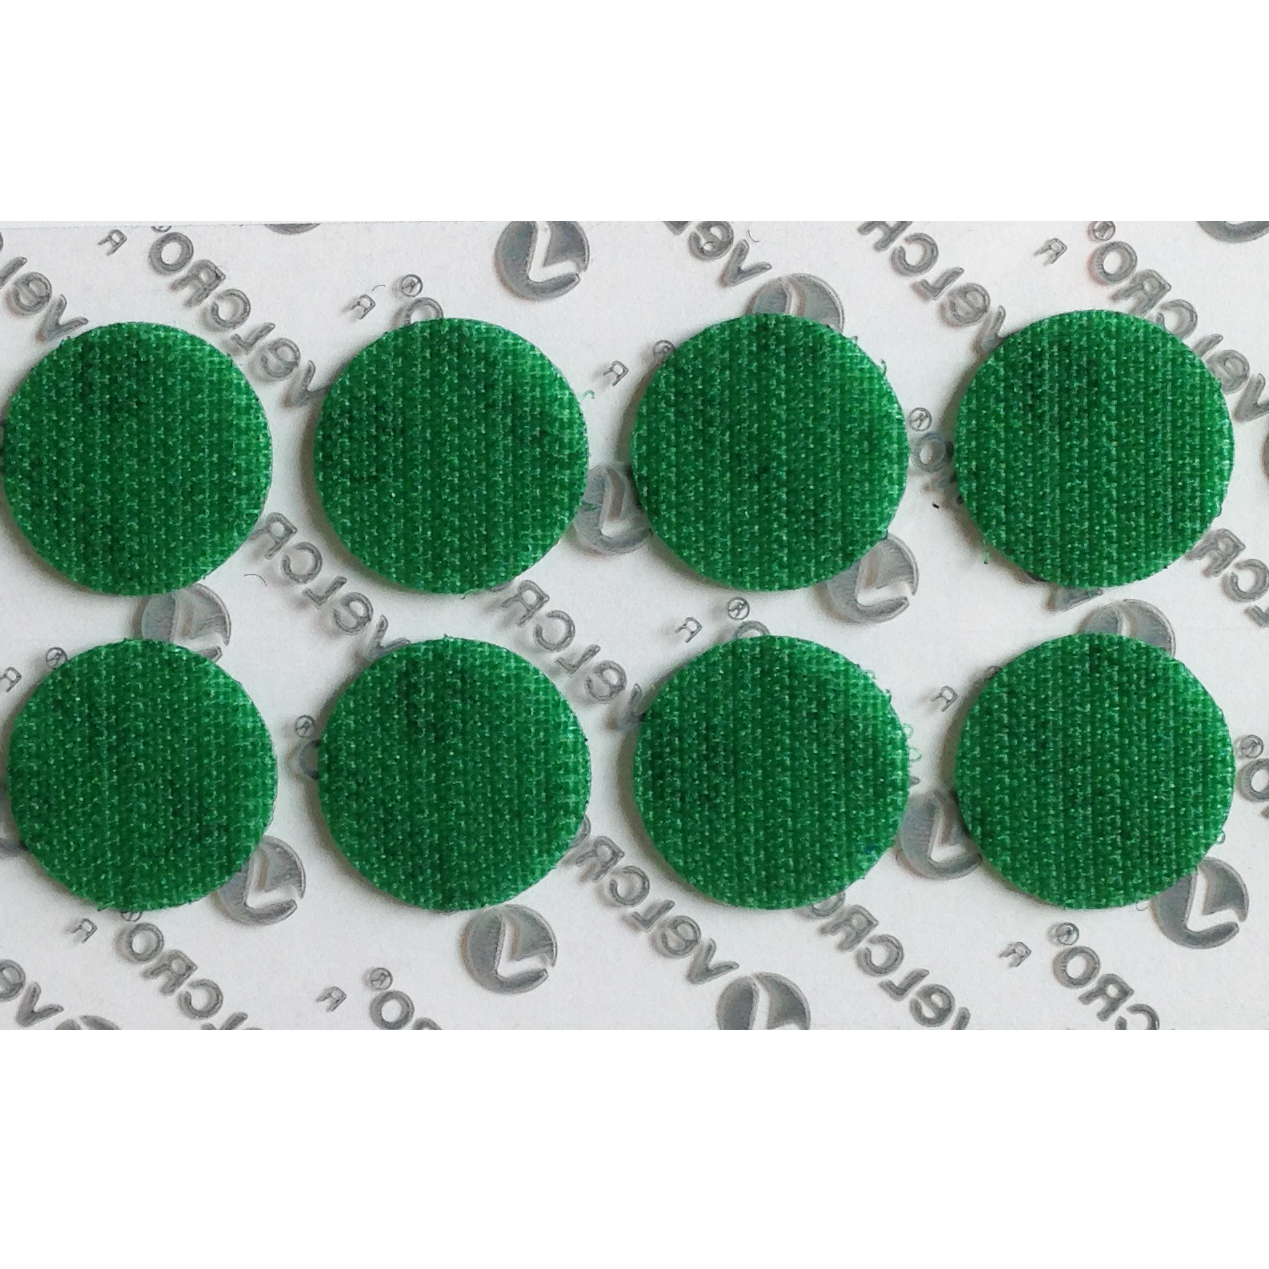 1/4 GREEN VELCRO® BRAND VELCOIN® HOOK ADHESIVE BACKED - COINS